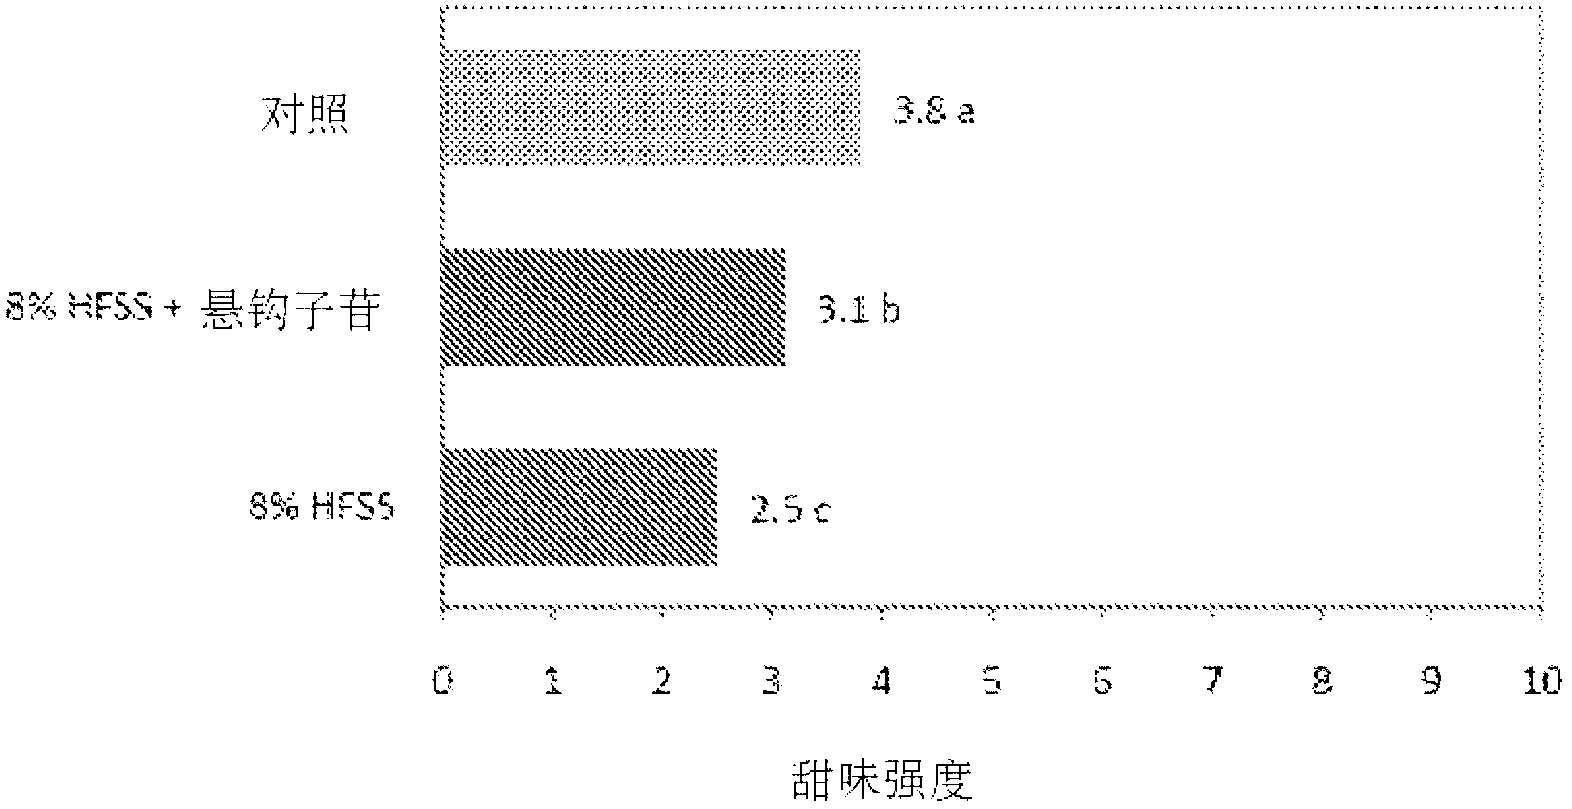 Sweetness enhancers, compositions thereof, and methods for use